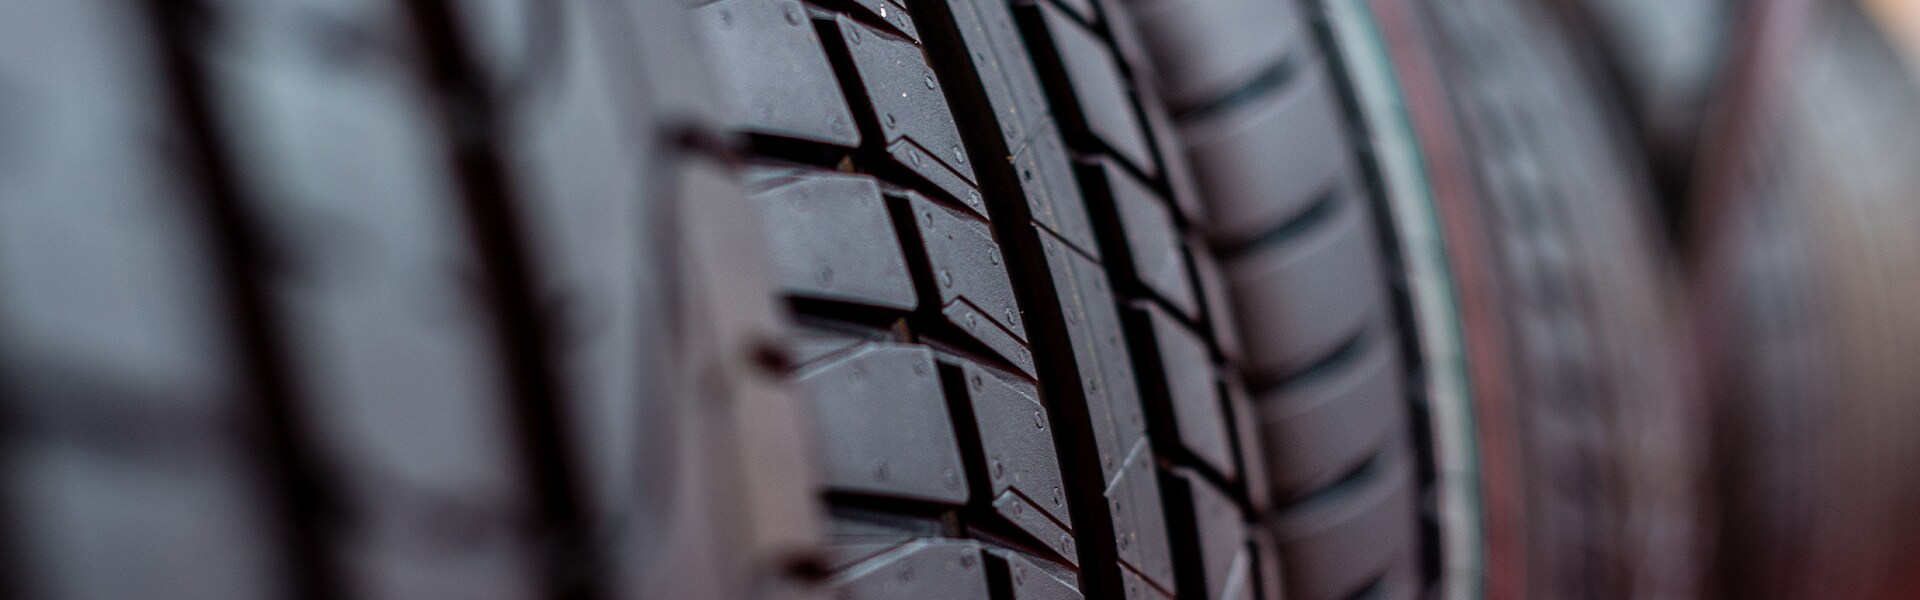 How to check your tires' health at Bobby Rahal Toyota of Mechanicsburg | A stack of brand new tires on a rack